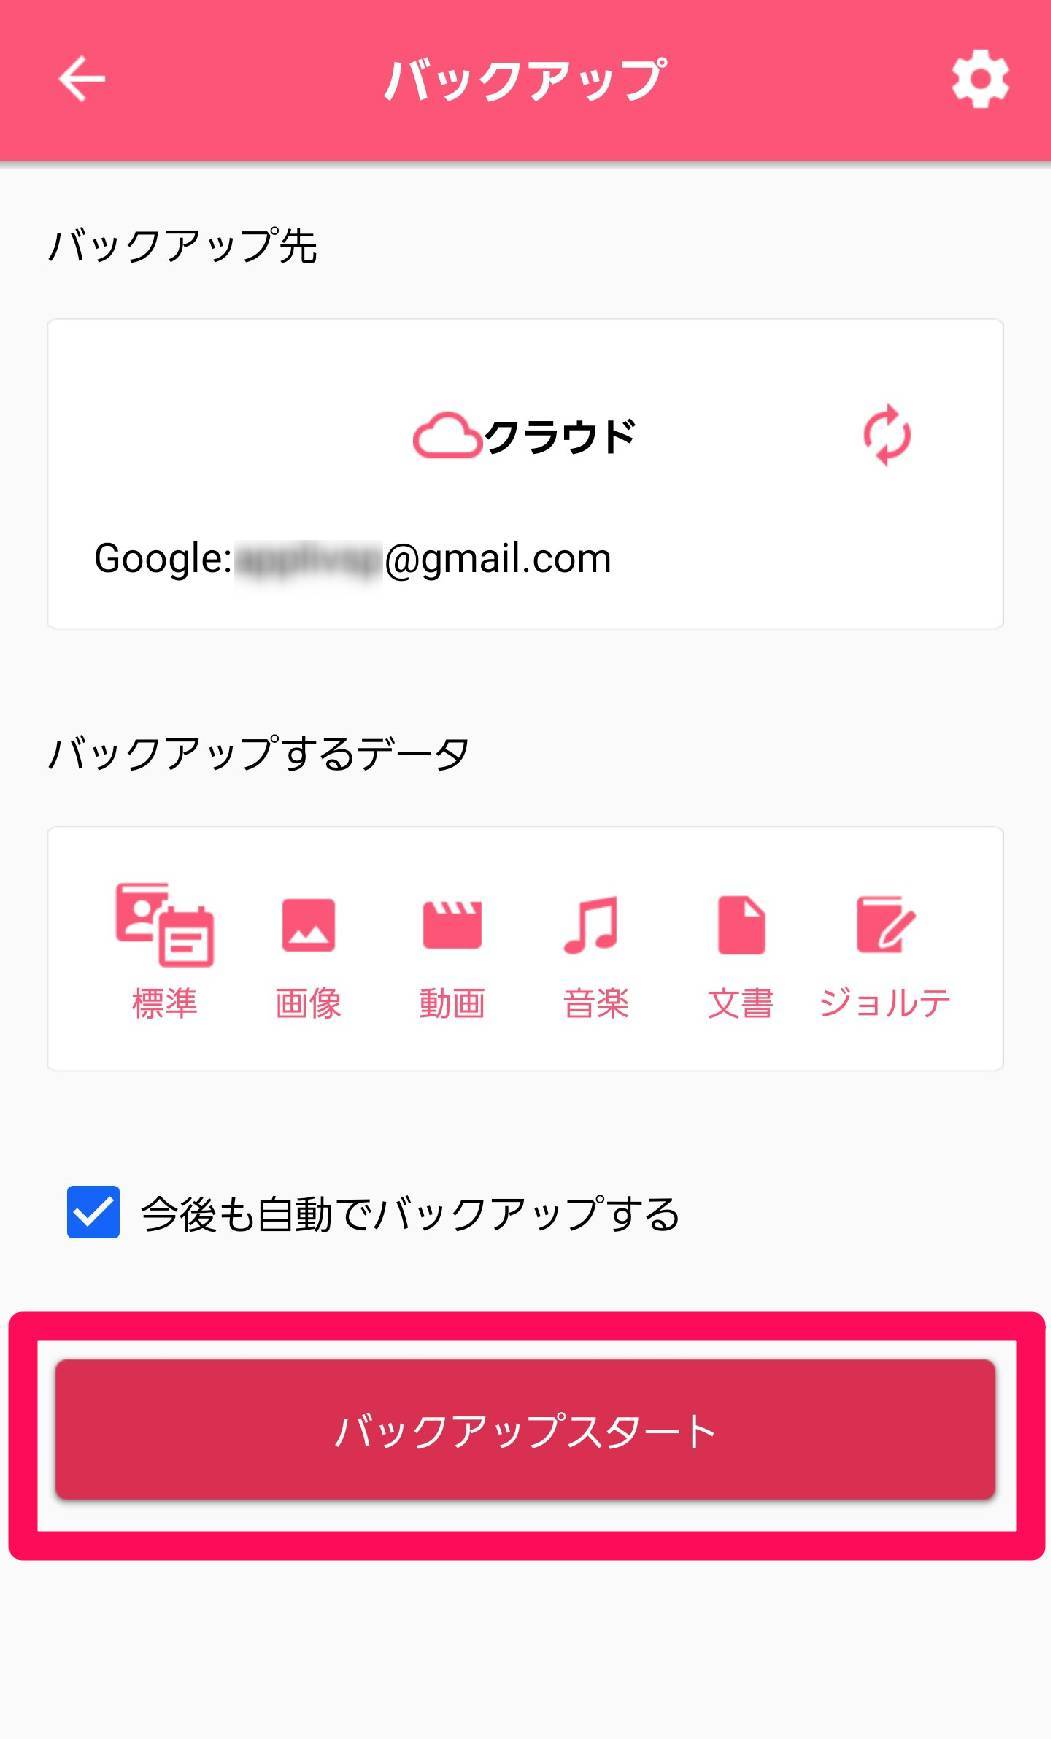 Androidスマホの バックアップ 方法 簡単操作で電話帳や画像を復元可能に Appliv Topics